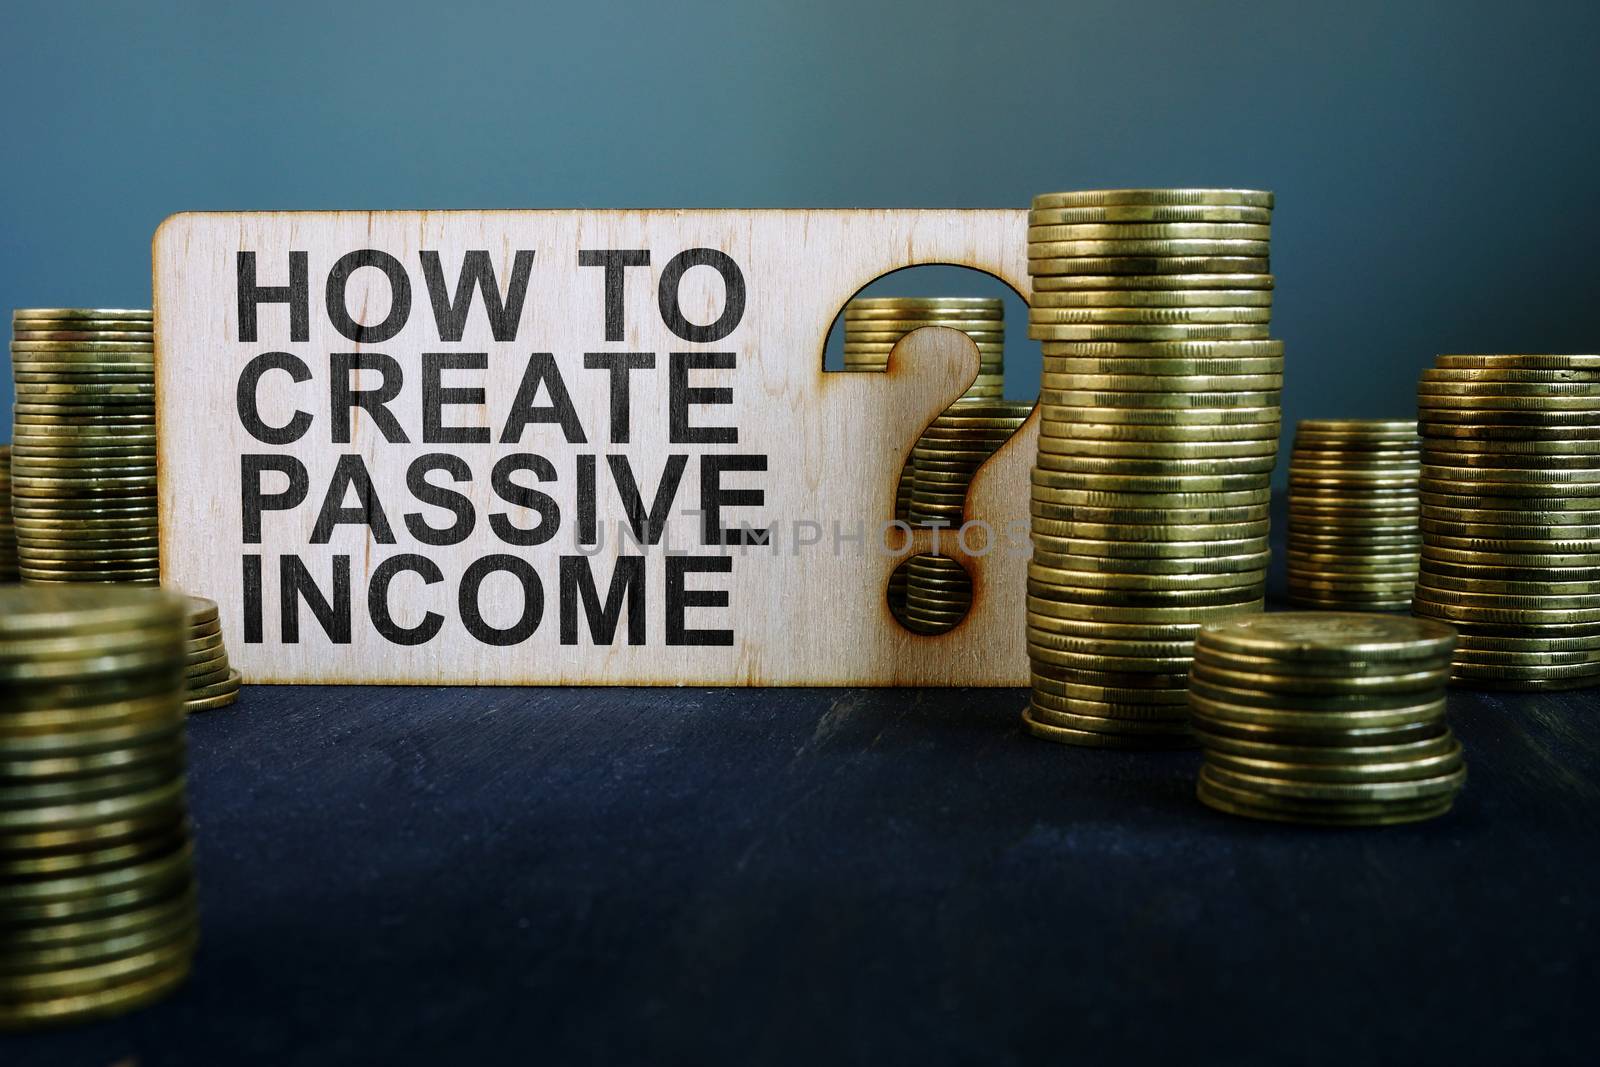 How to create passive income sign and coins. by designer491